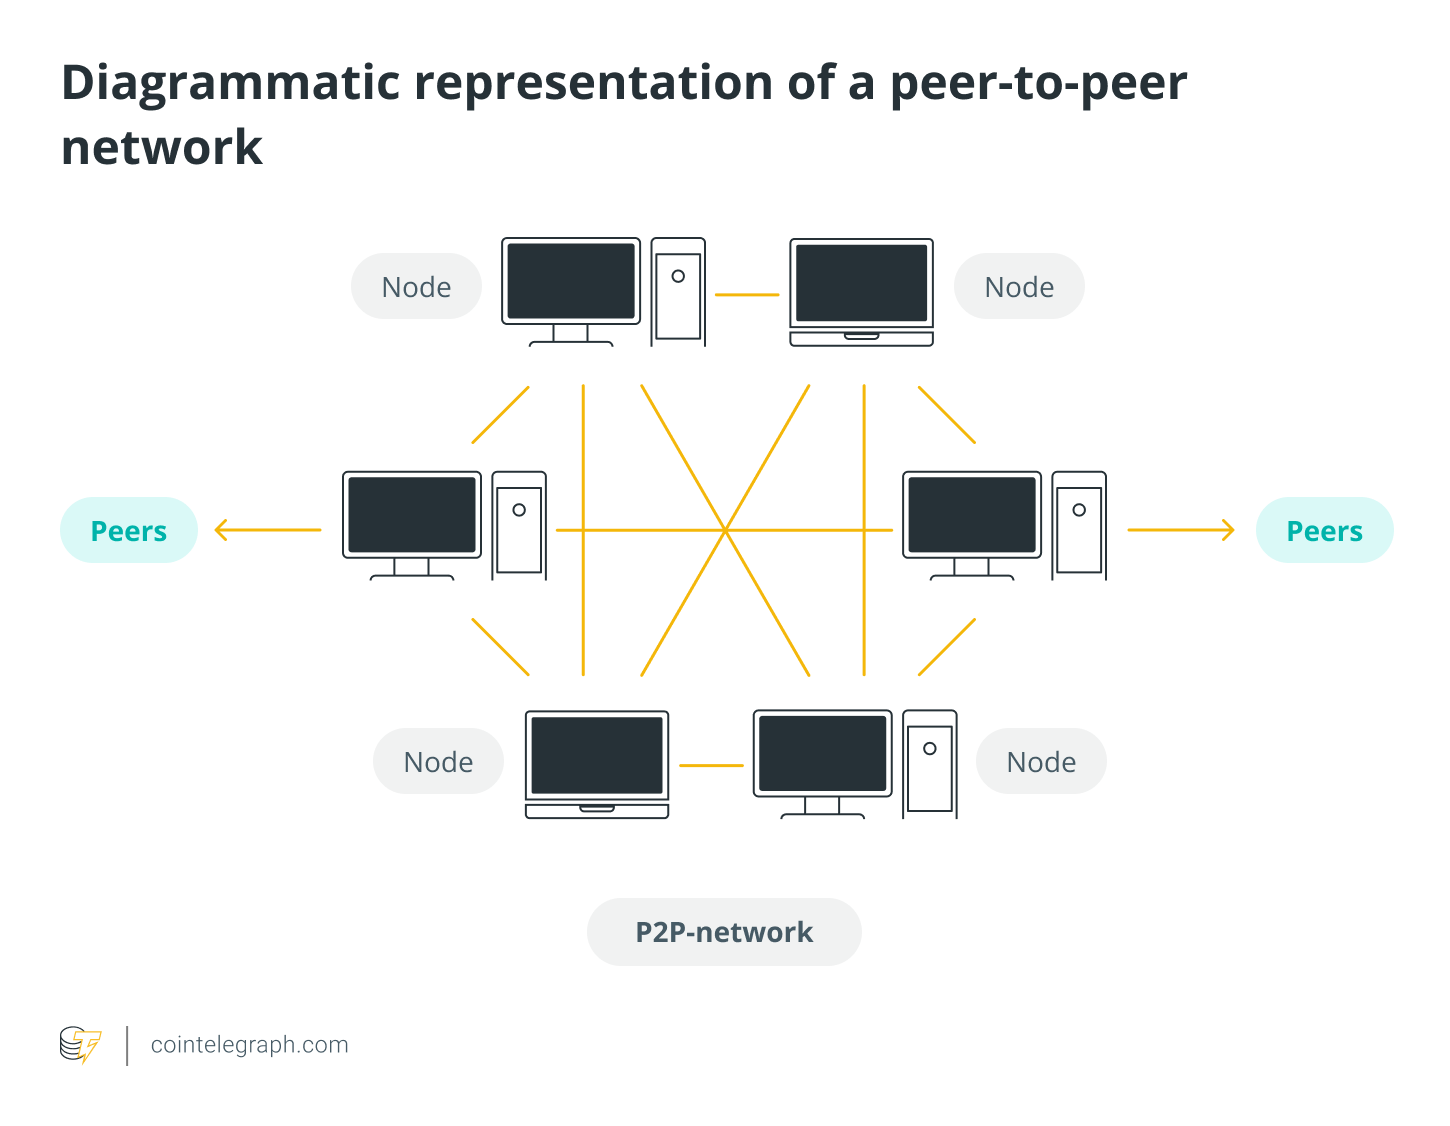 source: https://cointelegraph.com/blockchain-for-beginners/what-are-peer-to-peer-p2p-blockchain-networks-and-how-do-they-work